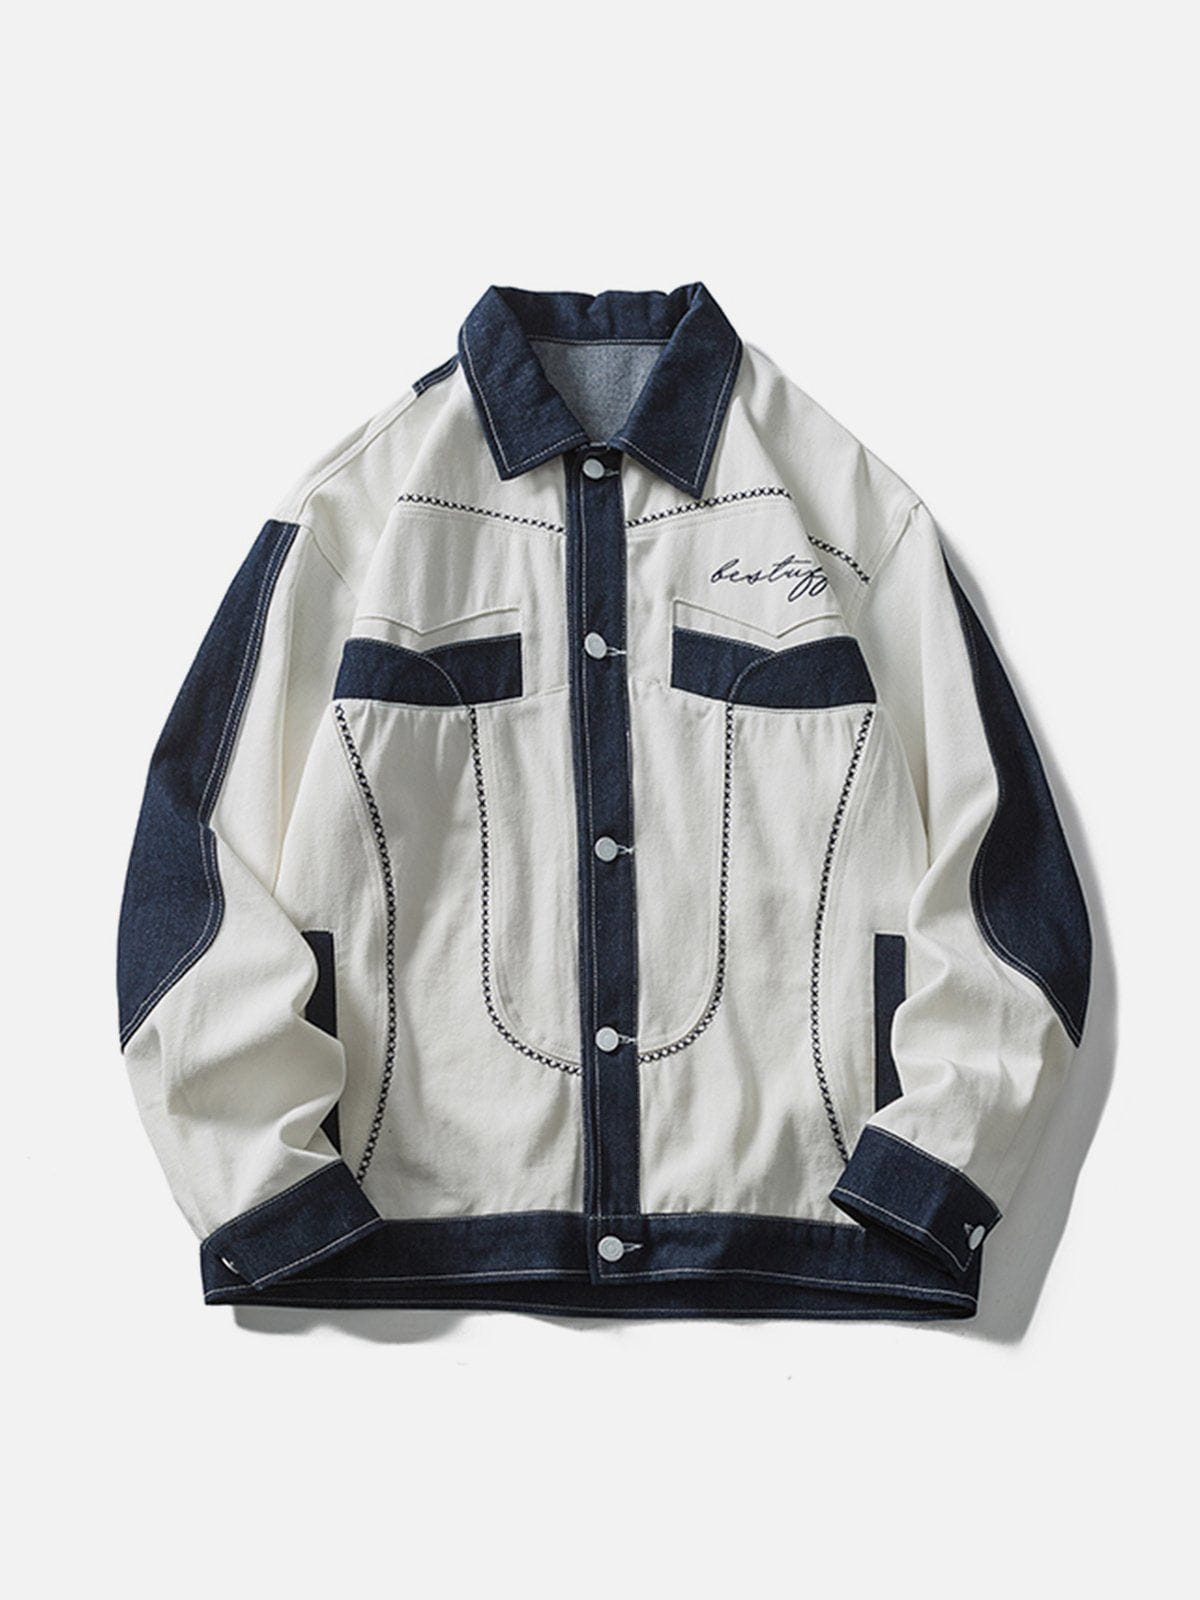 Majesda® - Embroidered Letter Patch Jacket outfit ideas, streetwear fashion - majesda.com